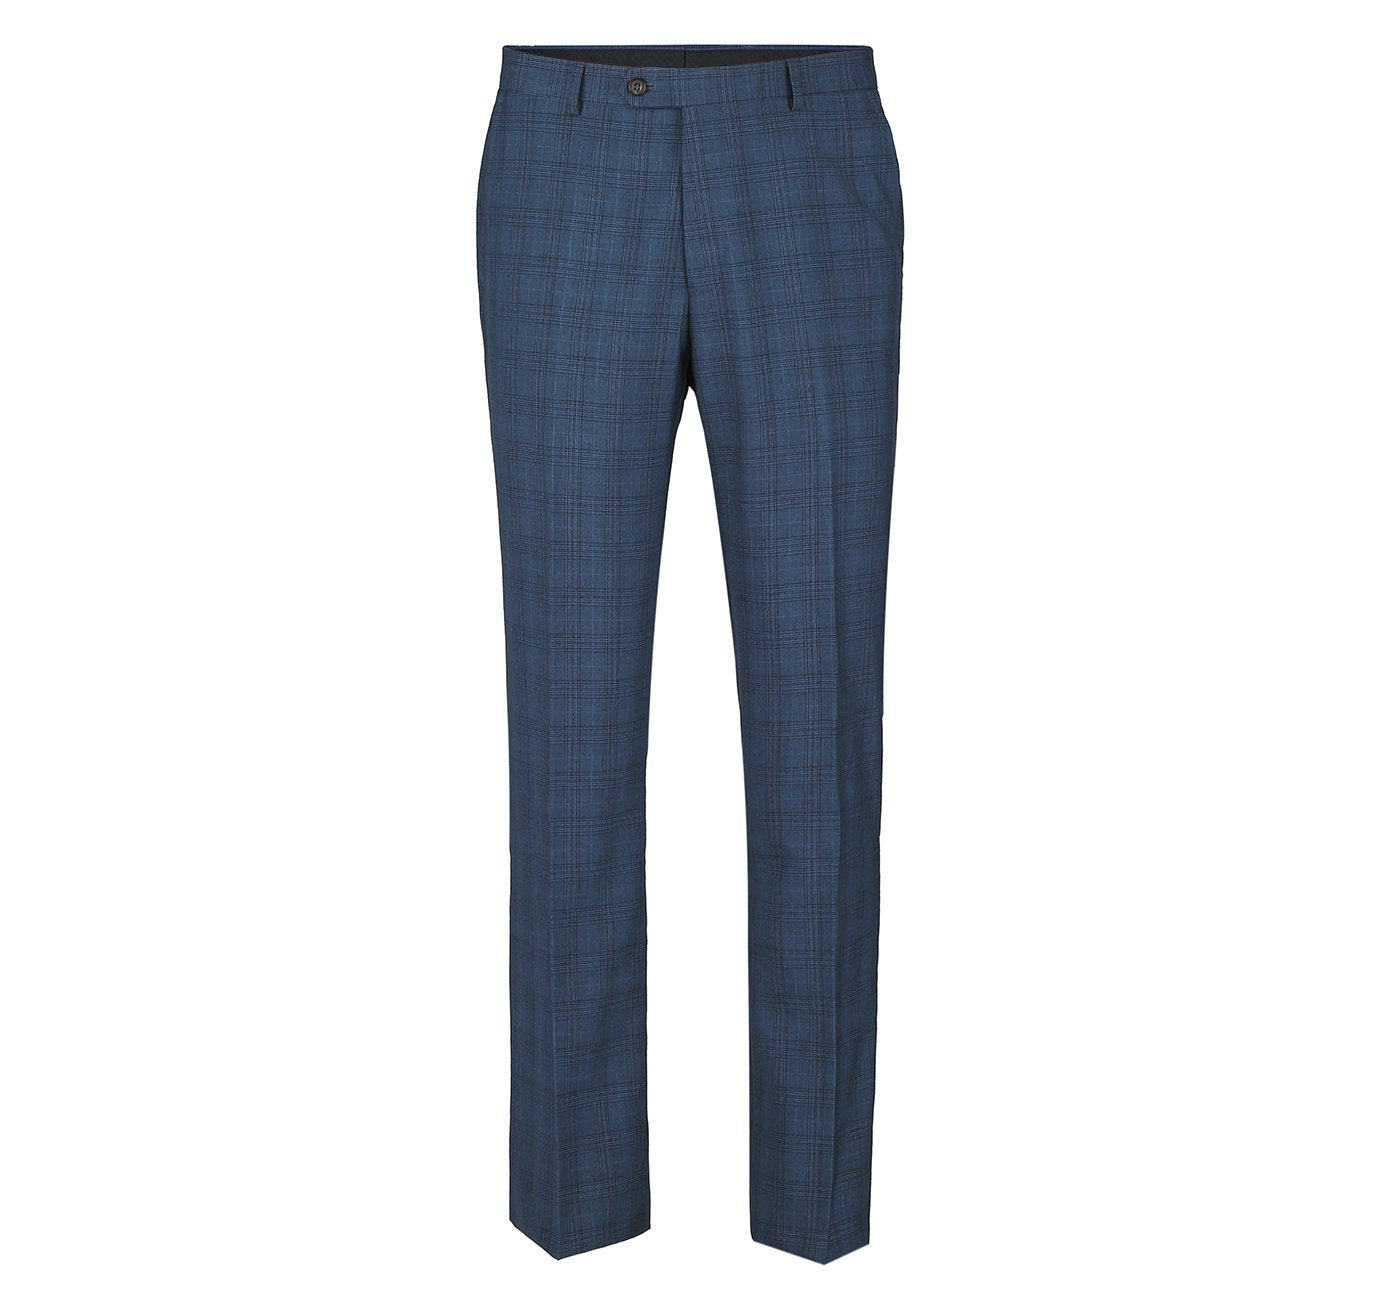 Performance 3-Piece CLASSIC FIT Suit in Blue Windowpane Check (Short, Regular, and Long Available) by Renoir